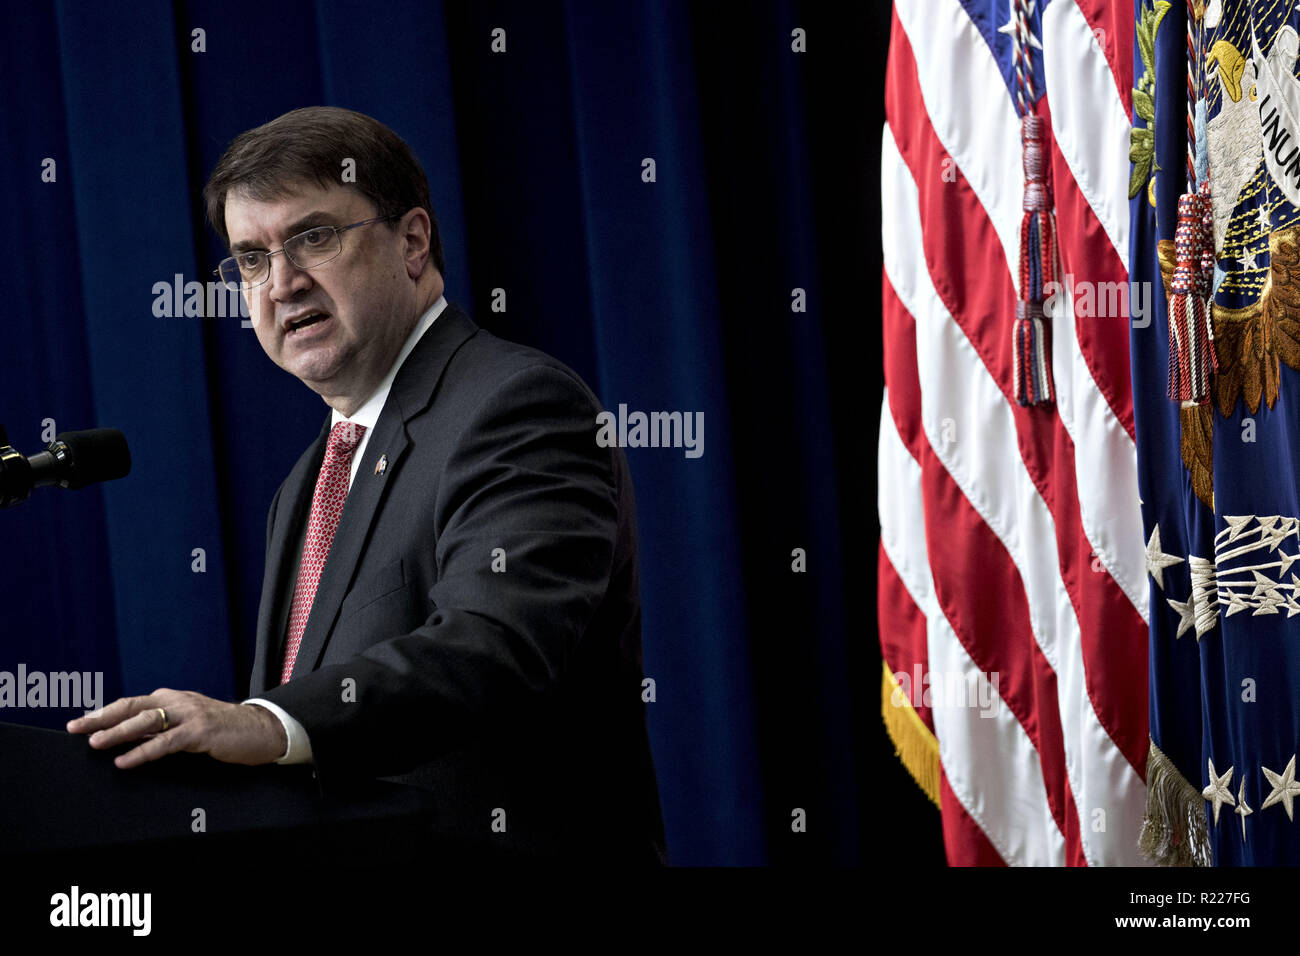 November 15, 2018 - Washington, District of Columbia, U.S. - United States Secretary of Veterans Affairs (VA) Robert Wilkie speaks during an event supporting veterans and military families in the Eisenhower Executive Office Building in Washington, DC, U.S., on Thursday, Nov. 15, 2018. US President Donald J. Trump today accused Robert Mueller of ''threatening'' witnesses to cooperate in the probe into Russian meddling in the U.S. presidential election, one day after the Senate's Republican leader blocked a bid to protect the special counsel's work. Credit: Andrew Harrer/Pool via CNP (Credi Stock Photo